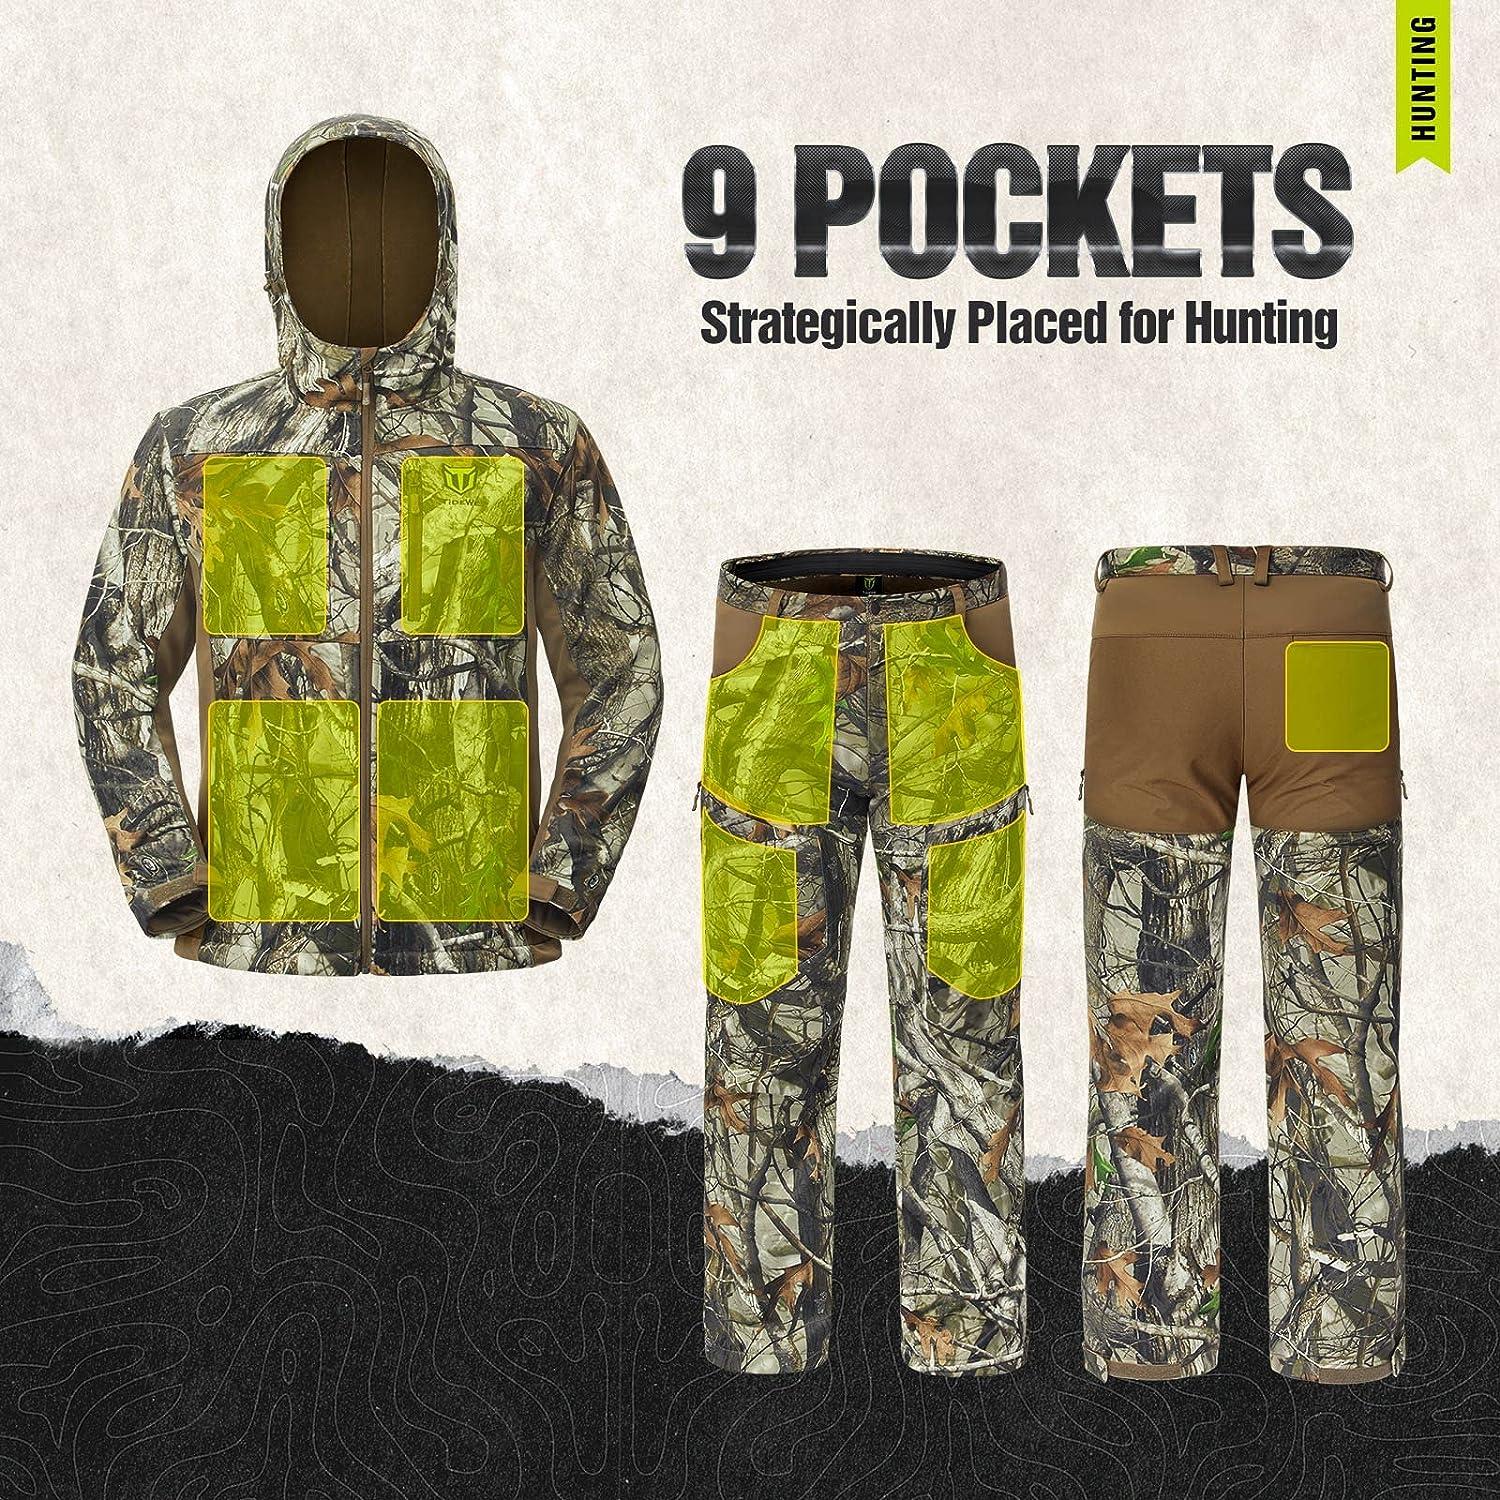 TIDEWE Hunting Clothes for Men with Fleece Lining, Safety Strap Compatible  Water Resistant Silent Hunting Jacket and Pants Next Camo G2 Medium